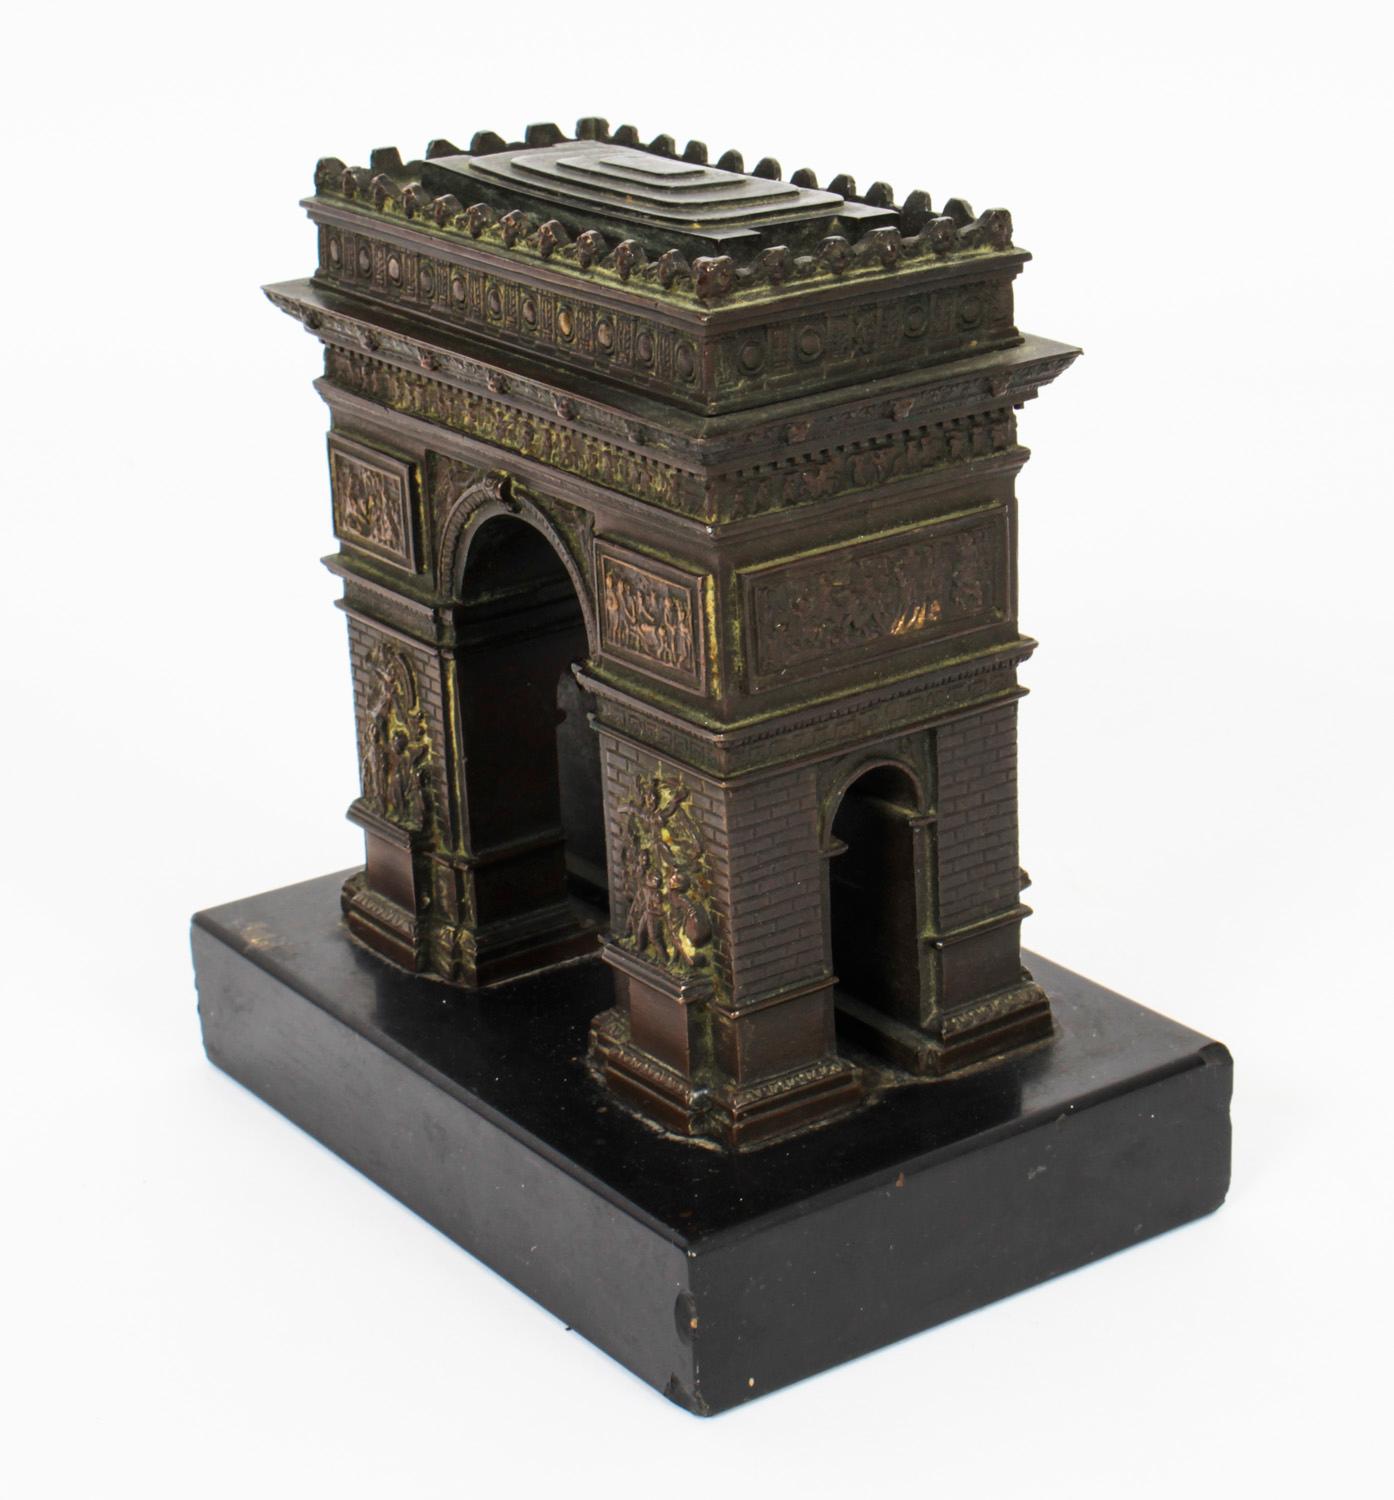 A lovely French bronze Grand Tour model of the Arc De Triomphe, circa 1860 in date.
 
The beautifully realistic model is cast in high relief and is mounted on a black marble base. 
 
The monument stand at the western end of the Champs-Élysées at